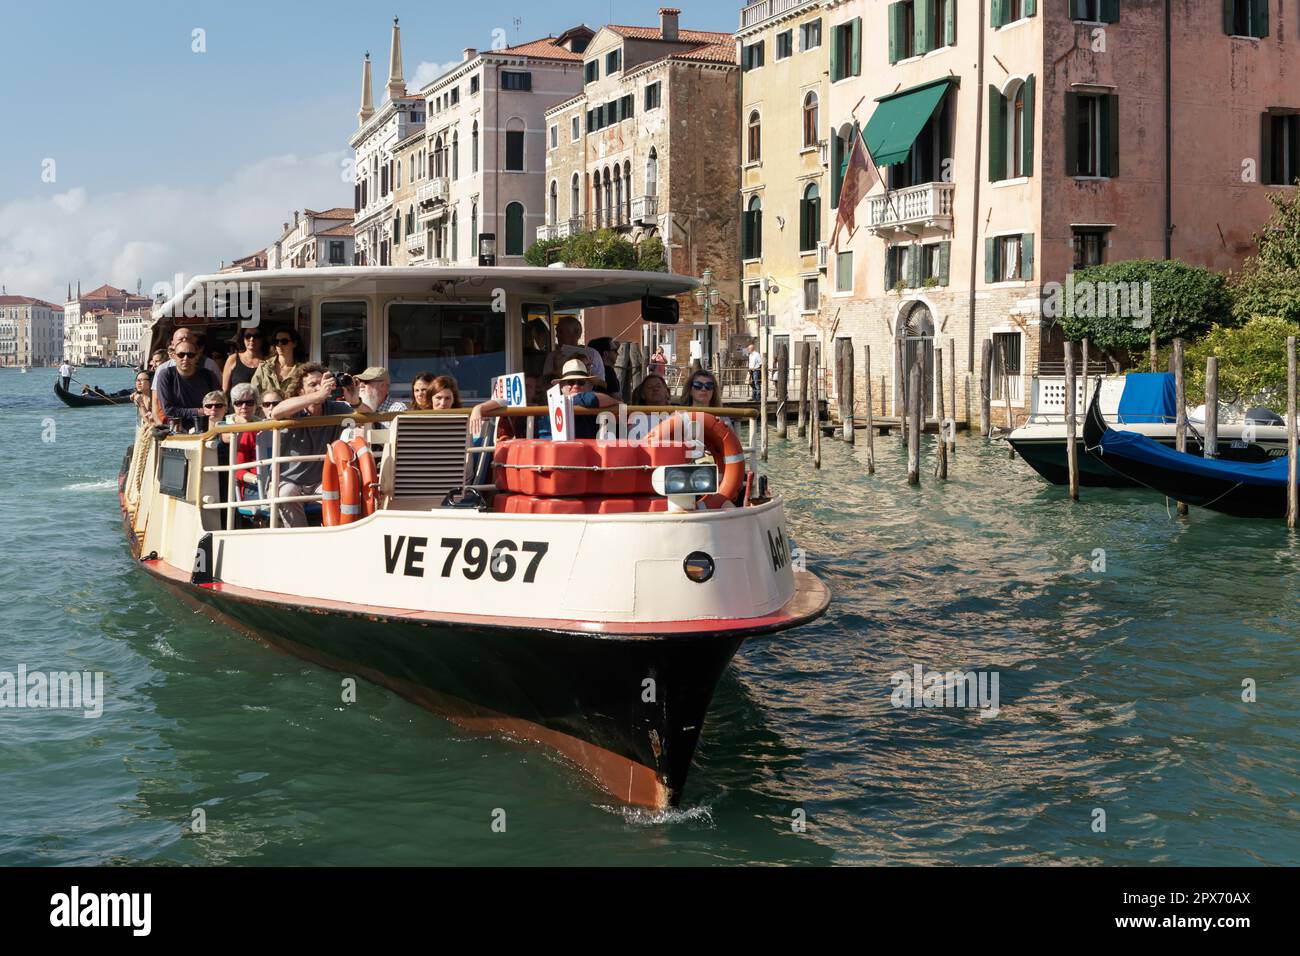 Venice, Italy- February 26th, 2011: Image Of A Vaporetto Reaching The  Zattere Station On The Grand Canal In Venice During The Carnival Days.  Vaporeto Is A Motorised Waterbus Which Ply Regular Routes